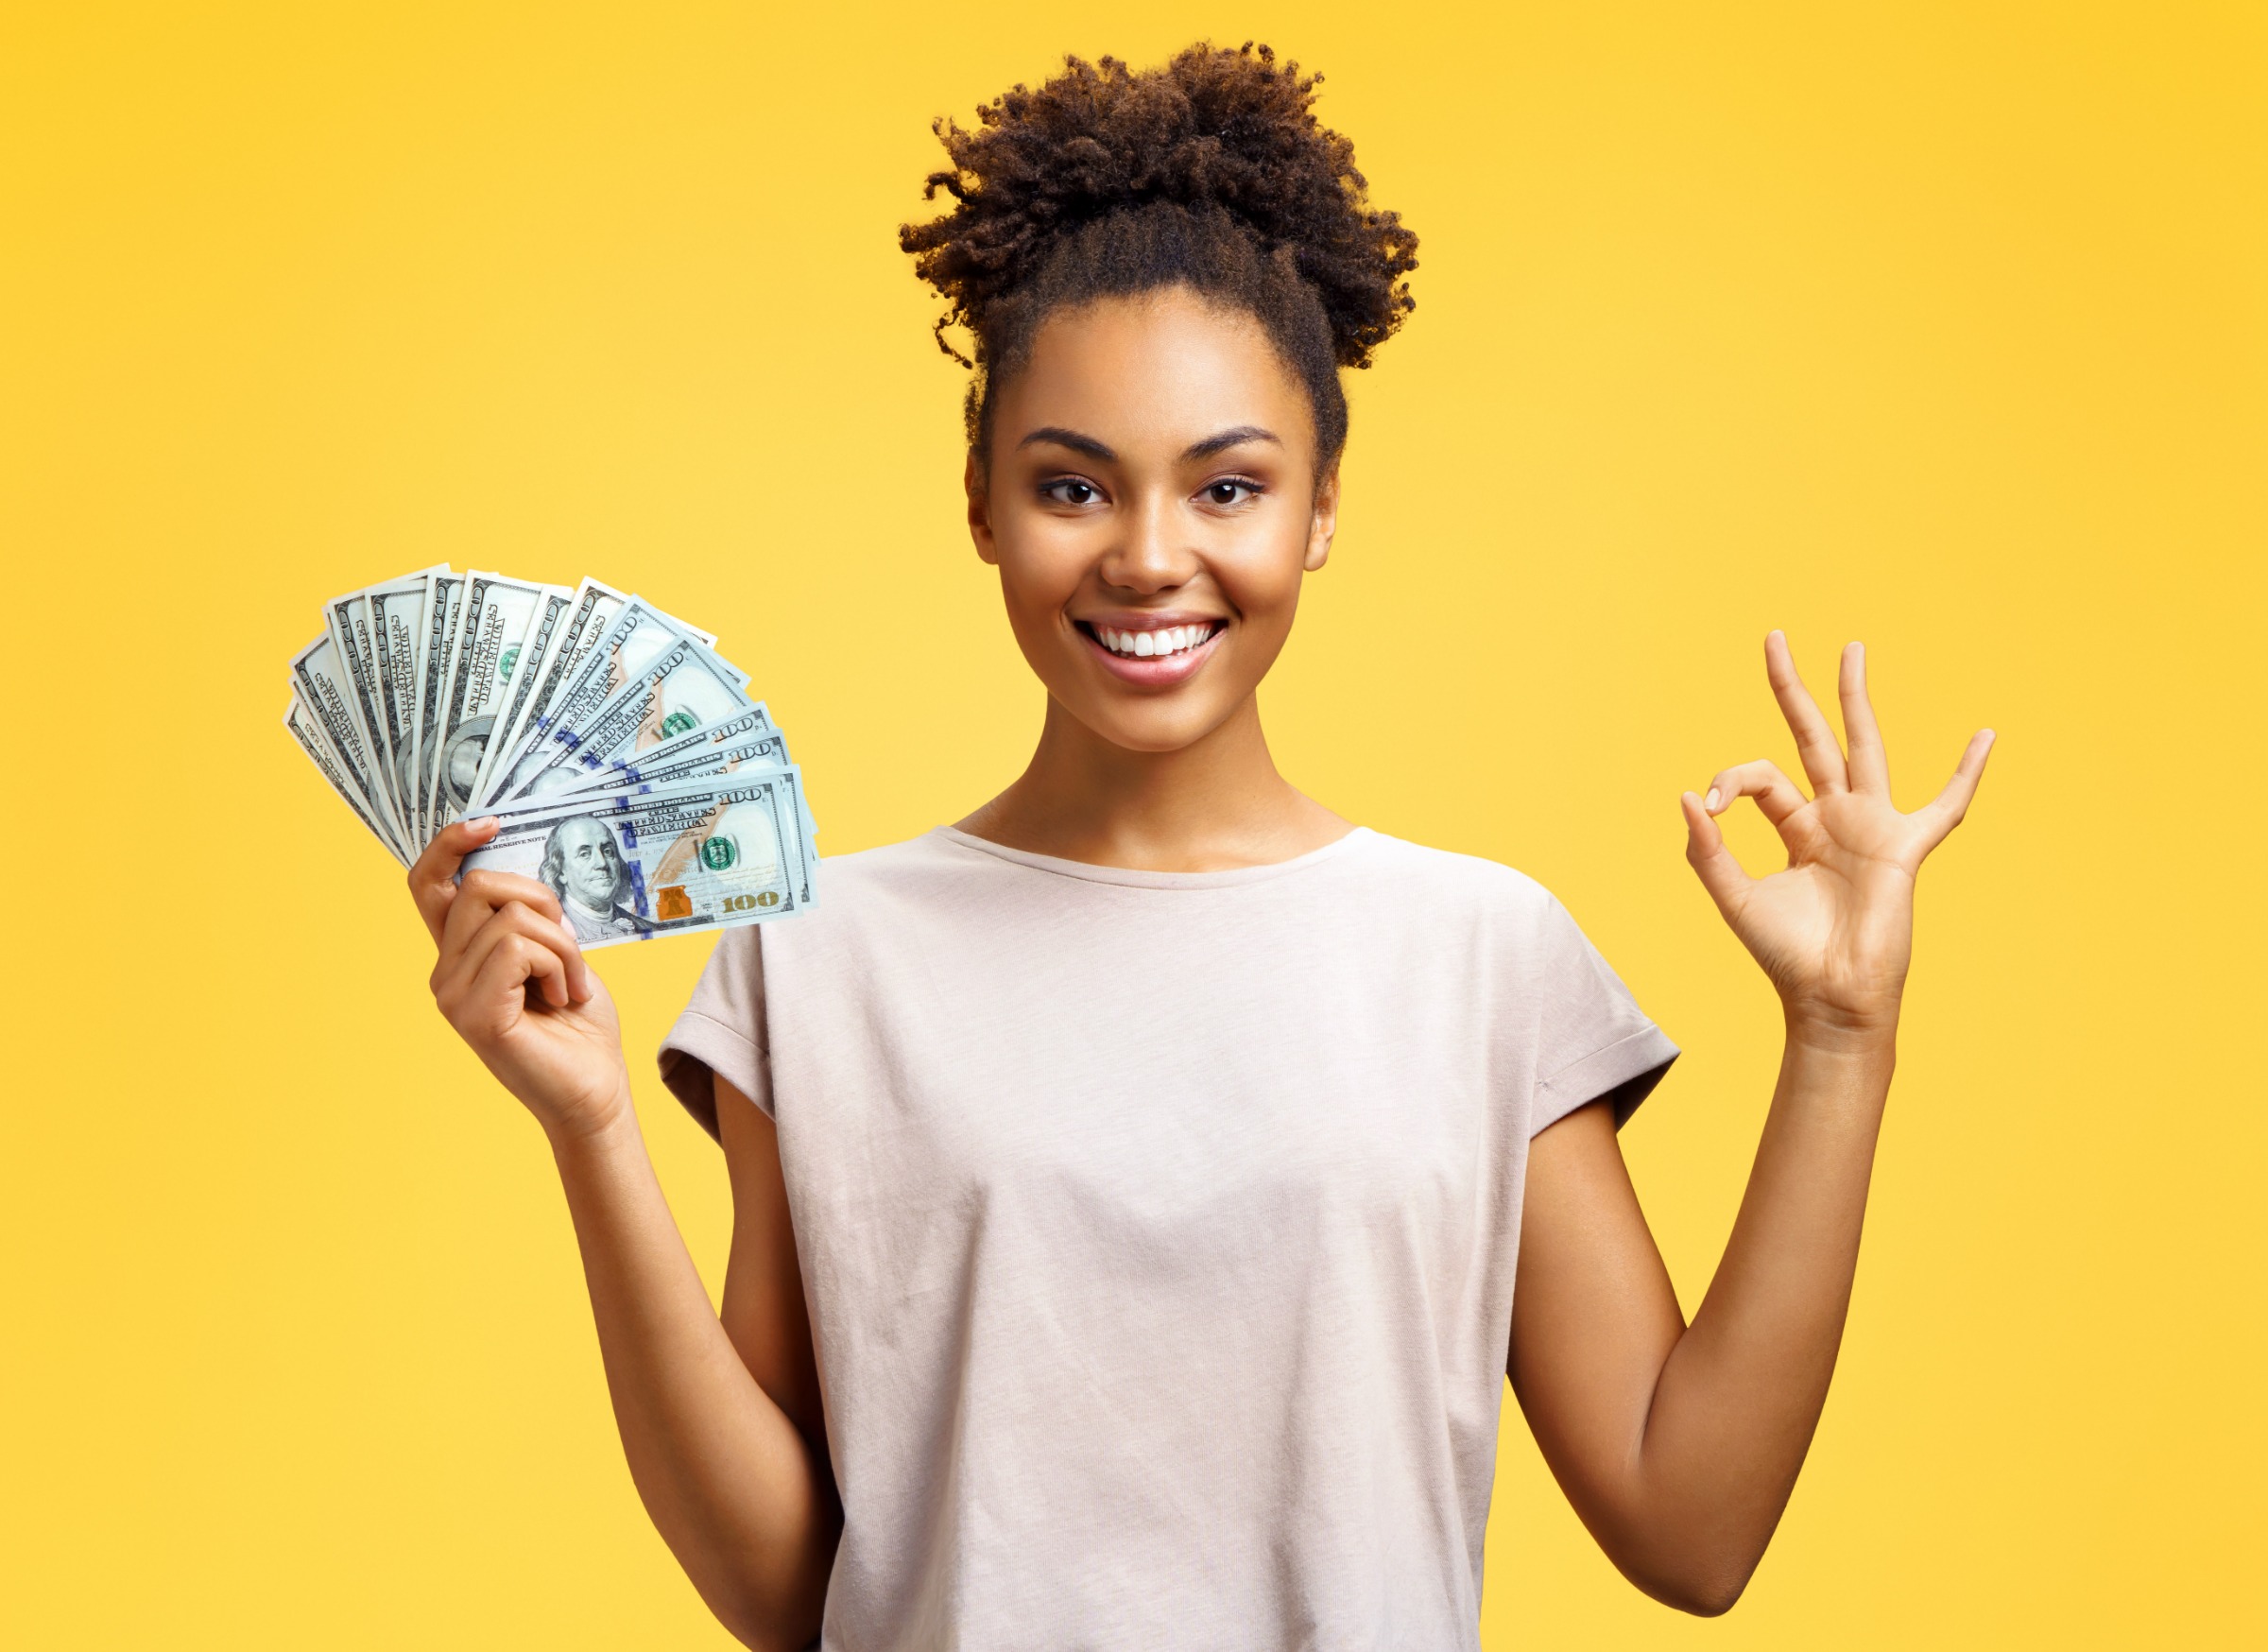 Smiling girl shows money cash and excellent sign, demonstrates that everything is fine. Photo of african american girl wears casual outfit on yellow background. Emotions and pleasant feelings concept.